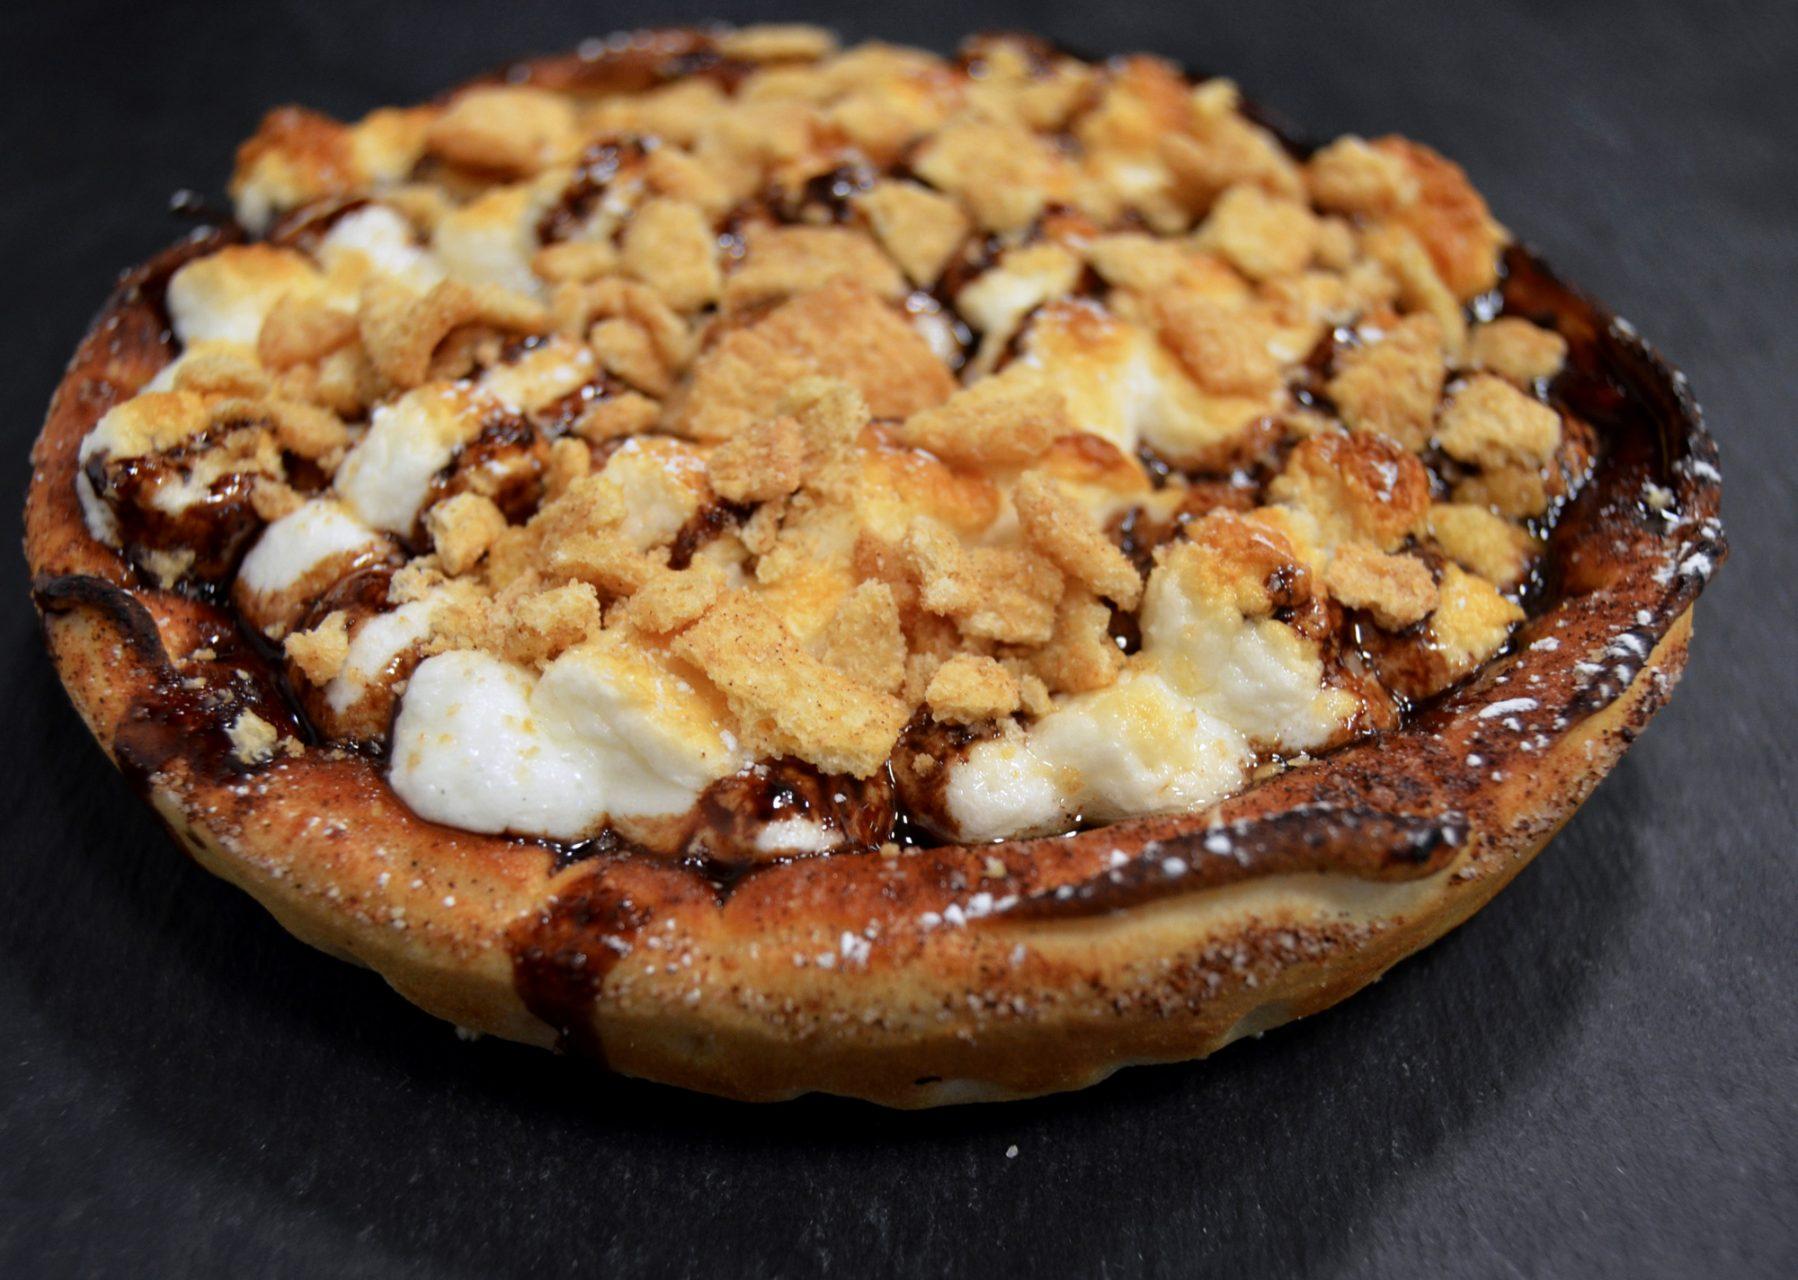 The s'mores dessert pizza is made at The Pizzeria of Roess Dining Hall. It's a 10-inch deep dish pie with marshmallows, chocolate syrup, and Cap'n Crunch cereal on top. 